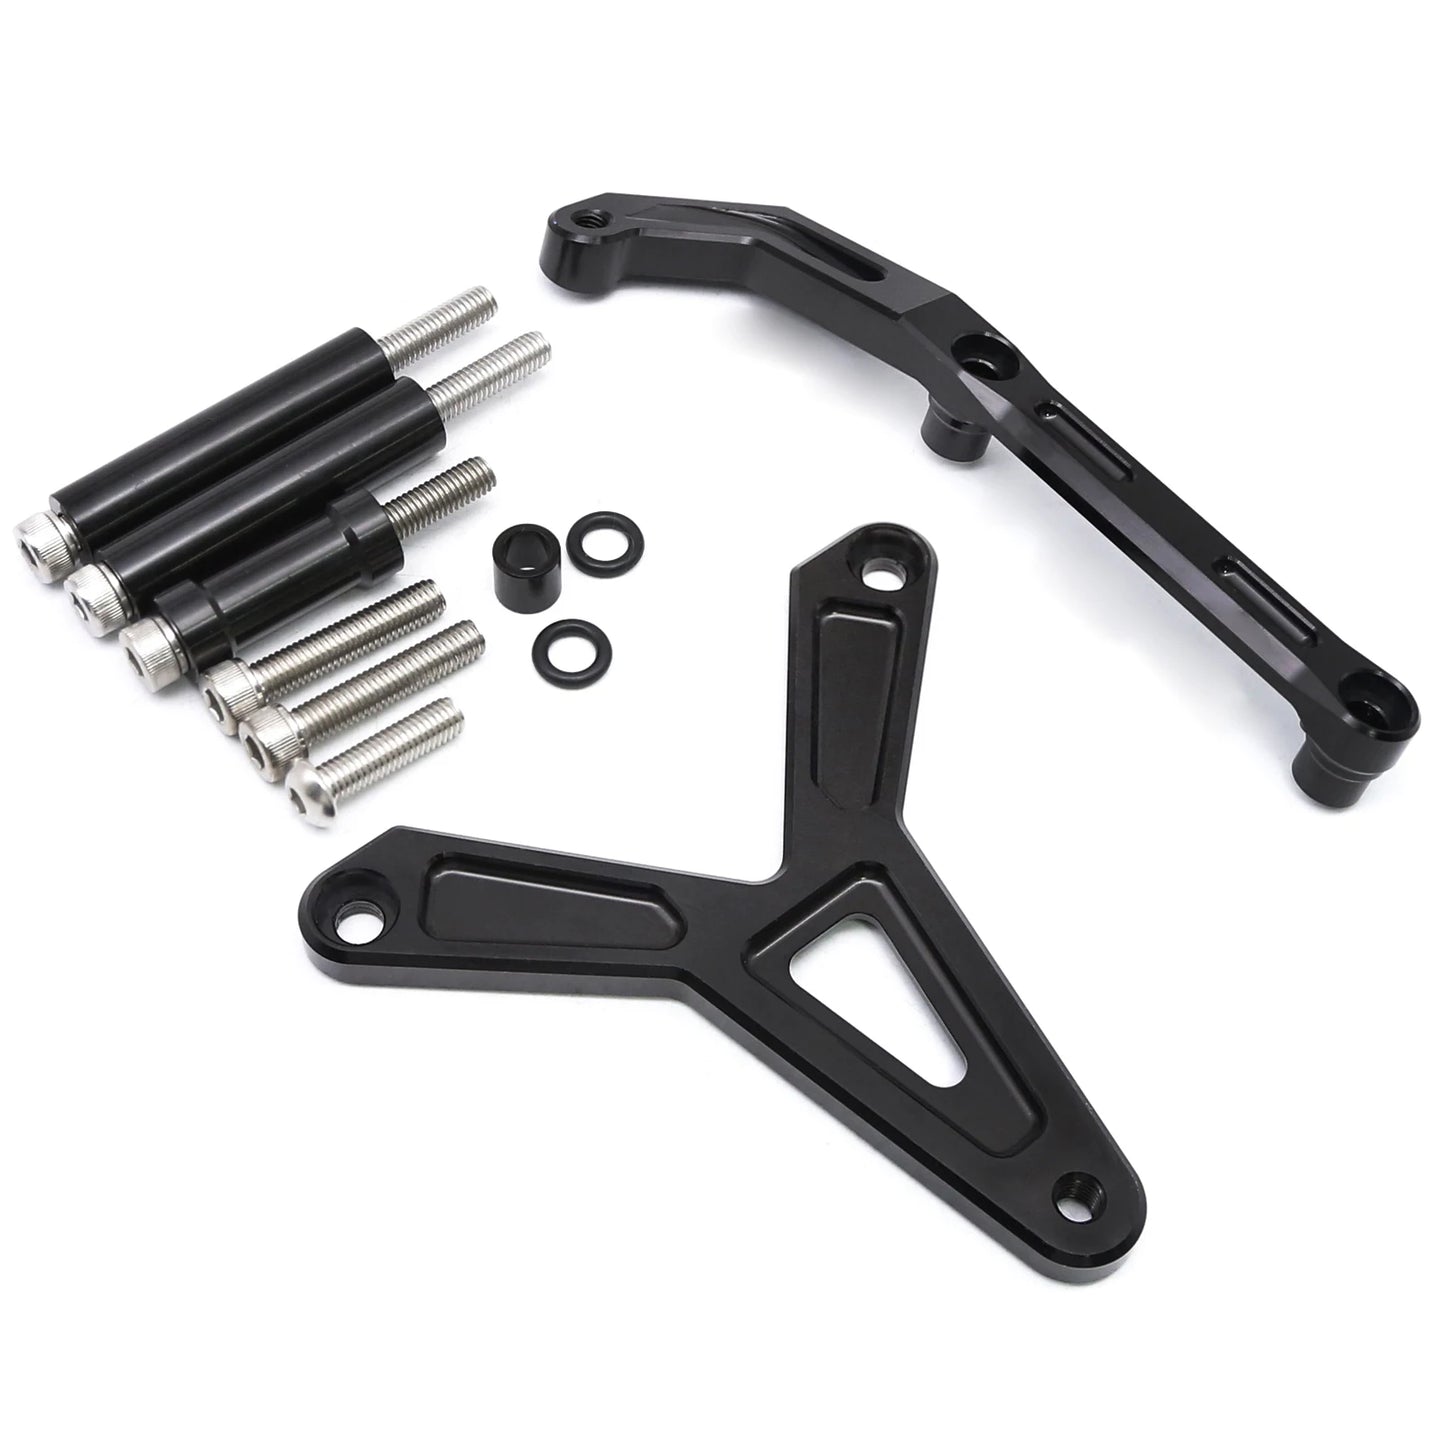 For YAMAHA Tracer 900 GT 2021 2022 2023 CNC Aluminum Carbon Motorcycle Steering Damper Stabilizer Bracket Mounting Support Kit